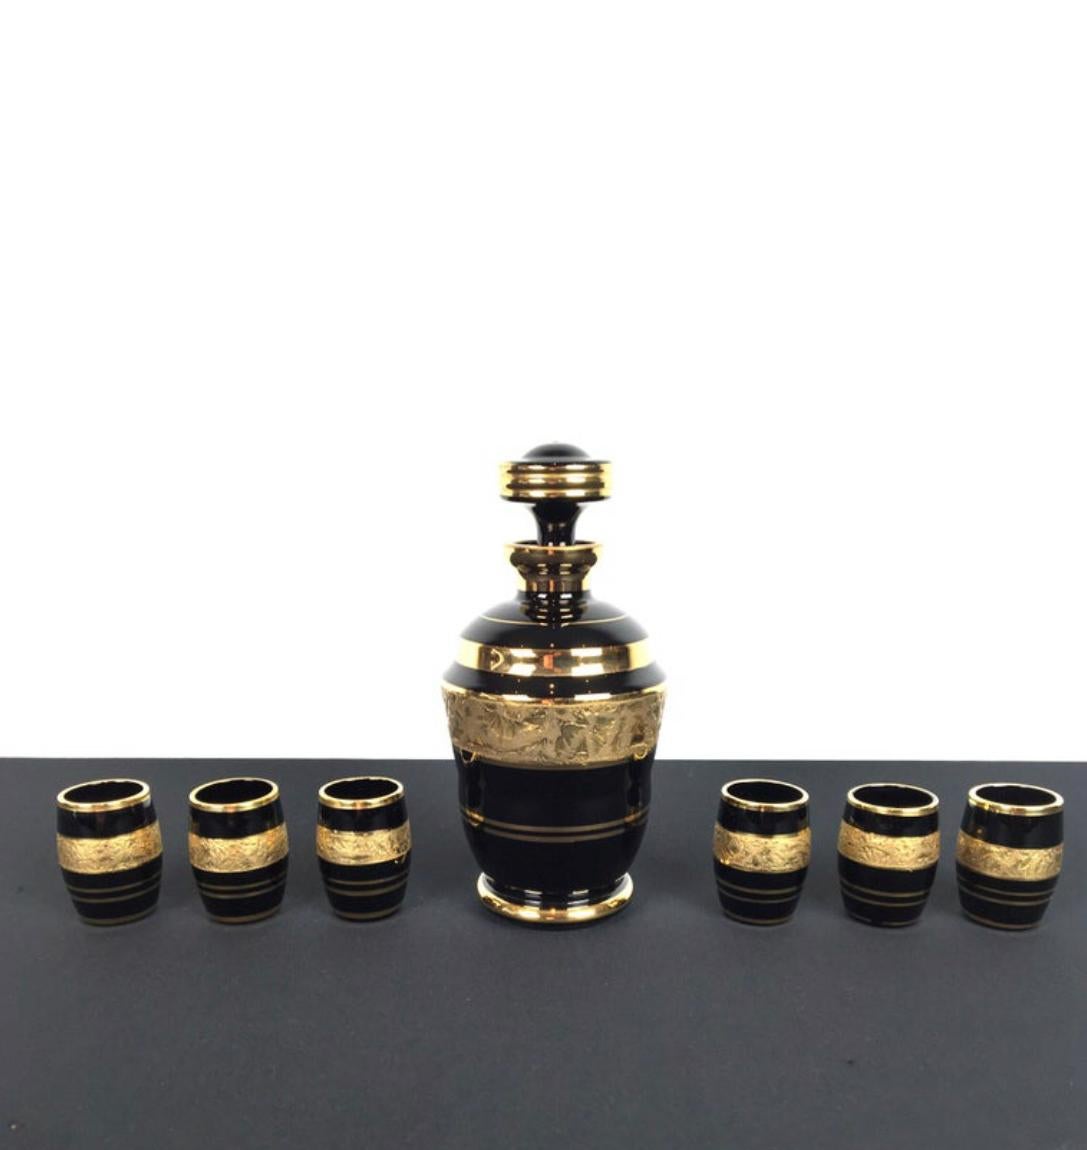 Art Deco liquor set in black and gold by De Rupel Boom Belgium. 
Black with gold carafe or decanter bottle with stopper and 6 glasses designed by Paul Heller. 
This 